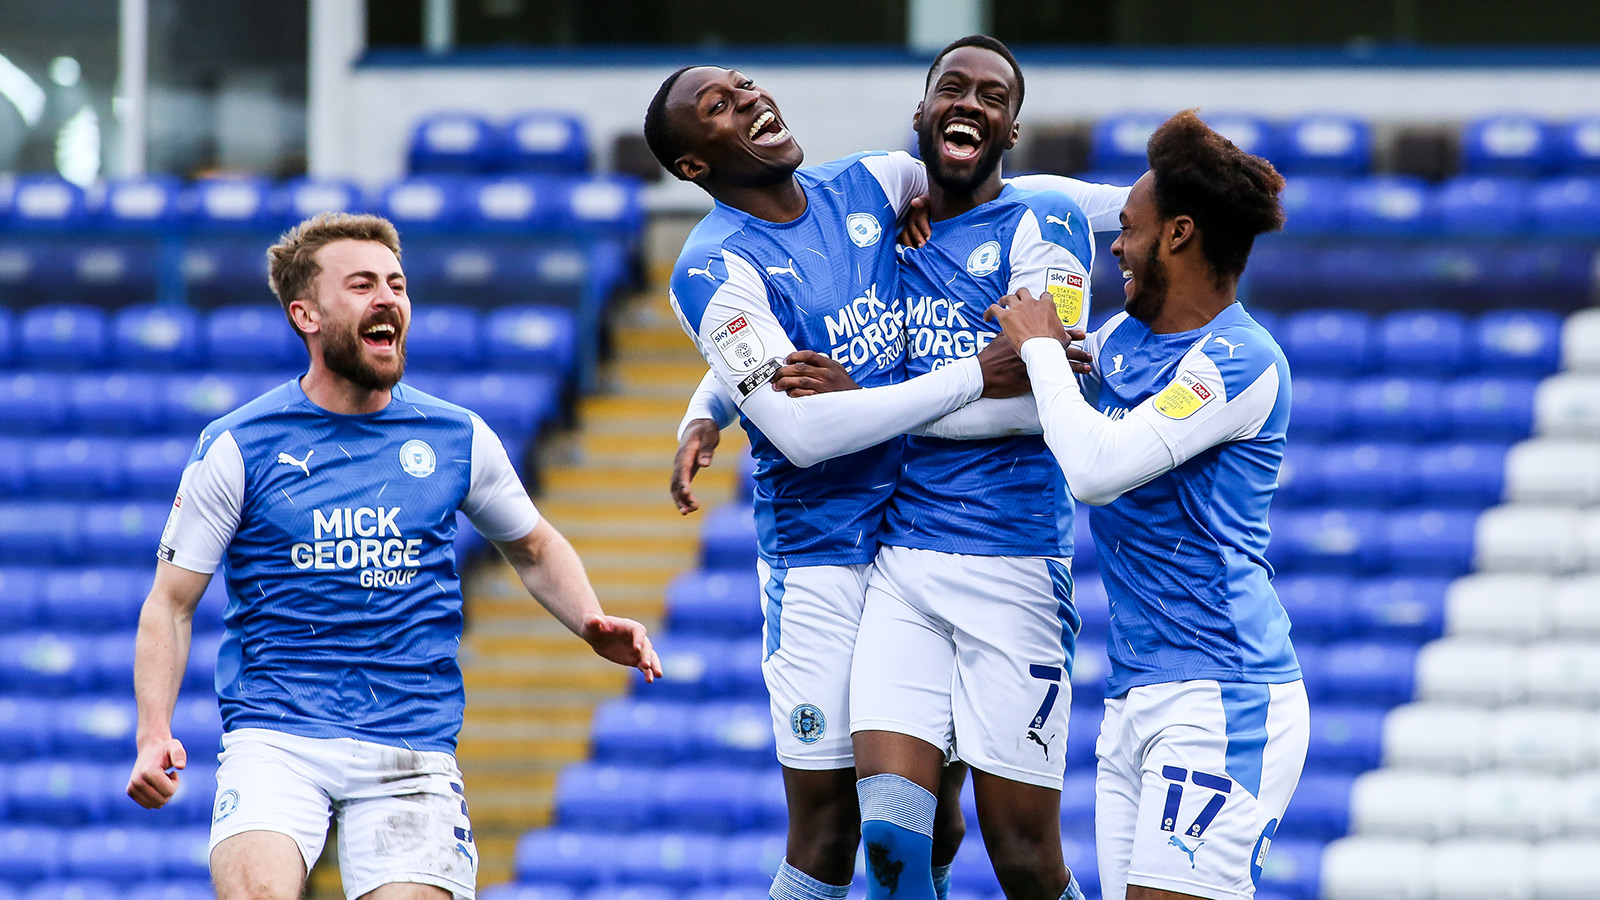 27th March '21 | A jubilant Mo Eisa and team-mates celebrate during the 7-0 rout of Accrington Stanley